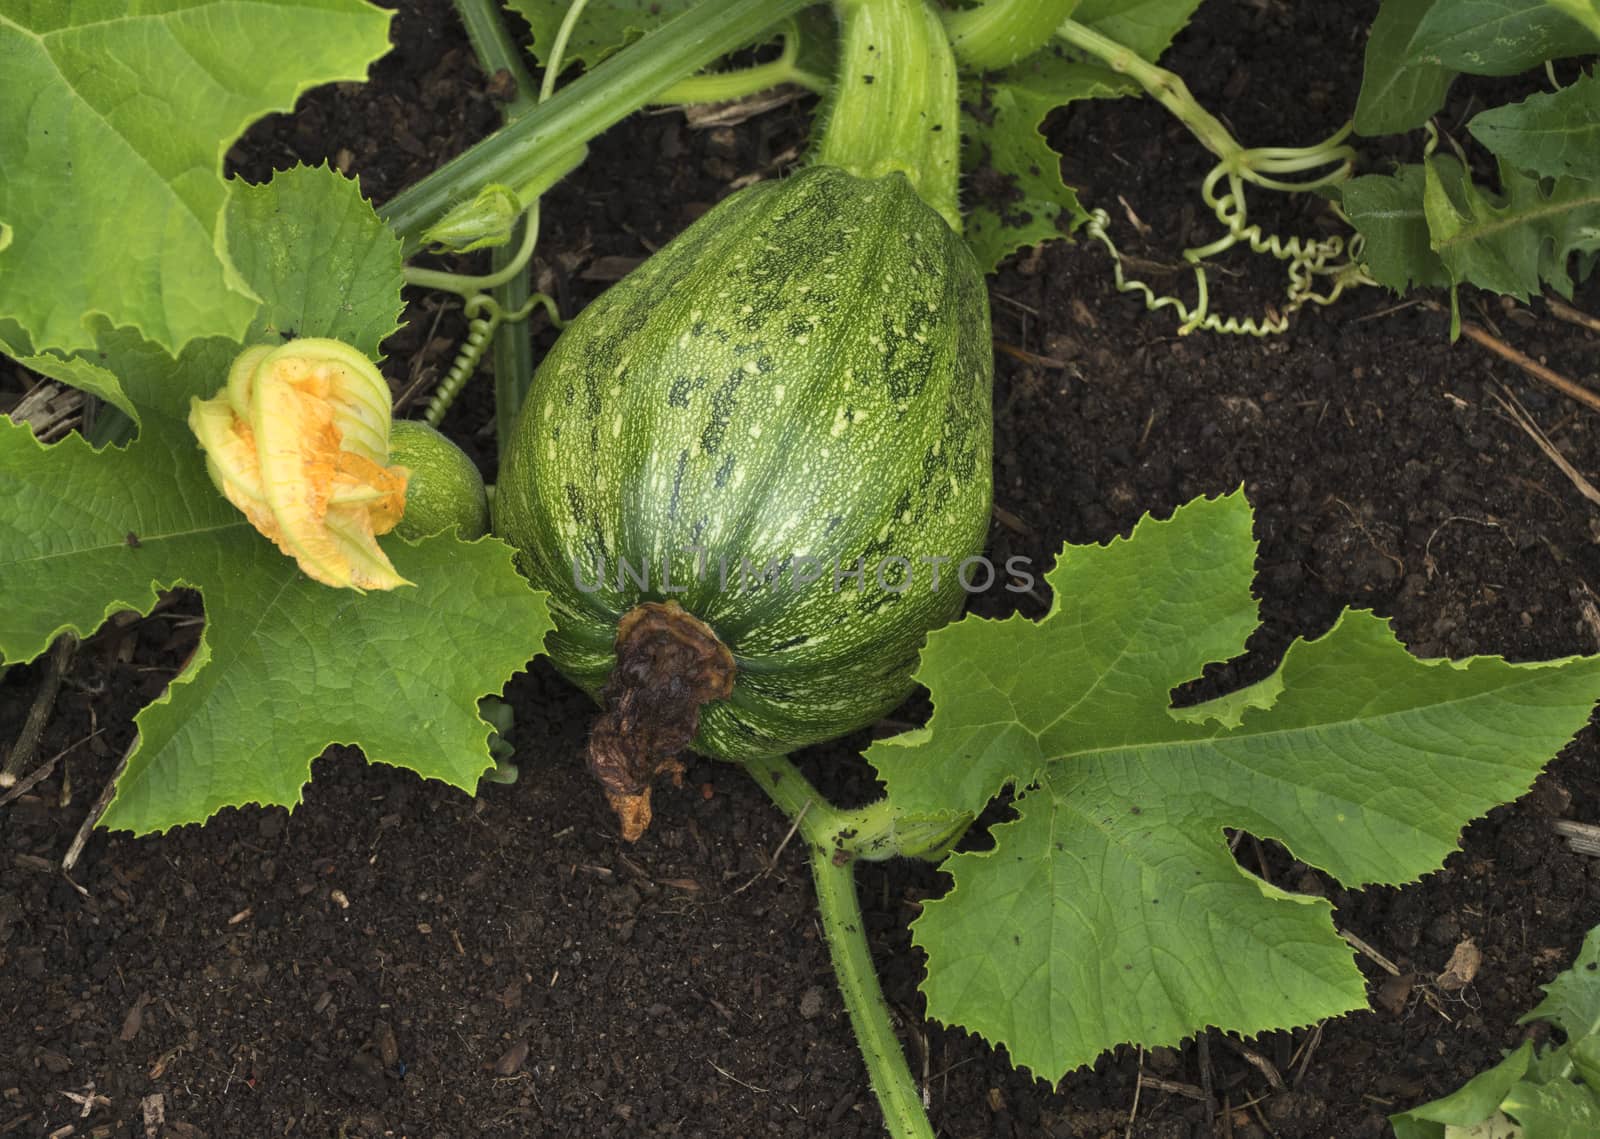 Squash growing on the vegetable bed in the garden.